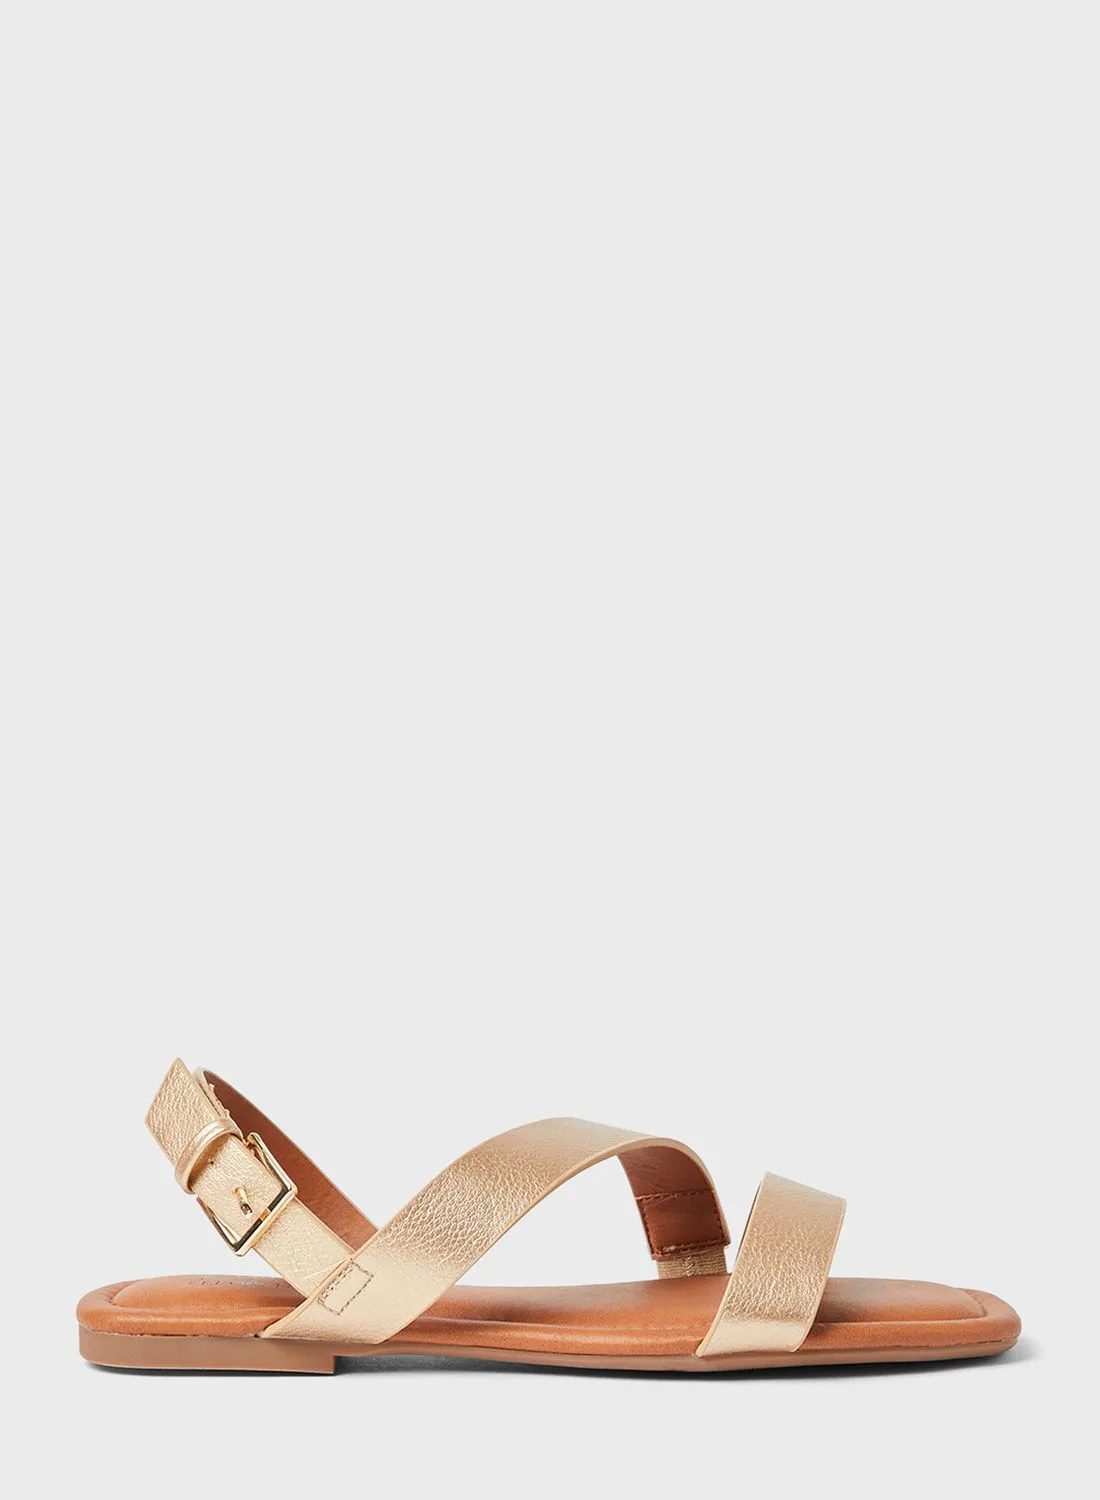 CALL IT SPRING Iggy Buckle Flat Sandals